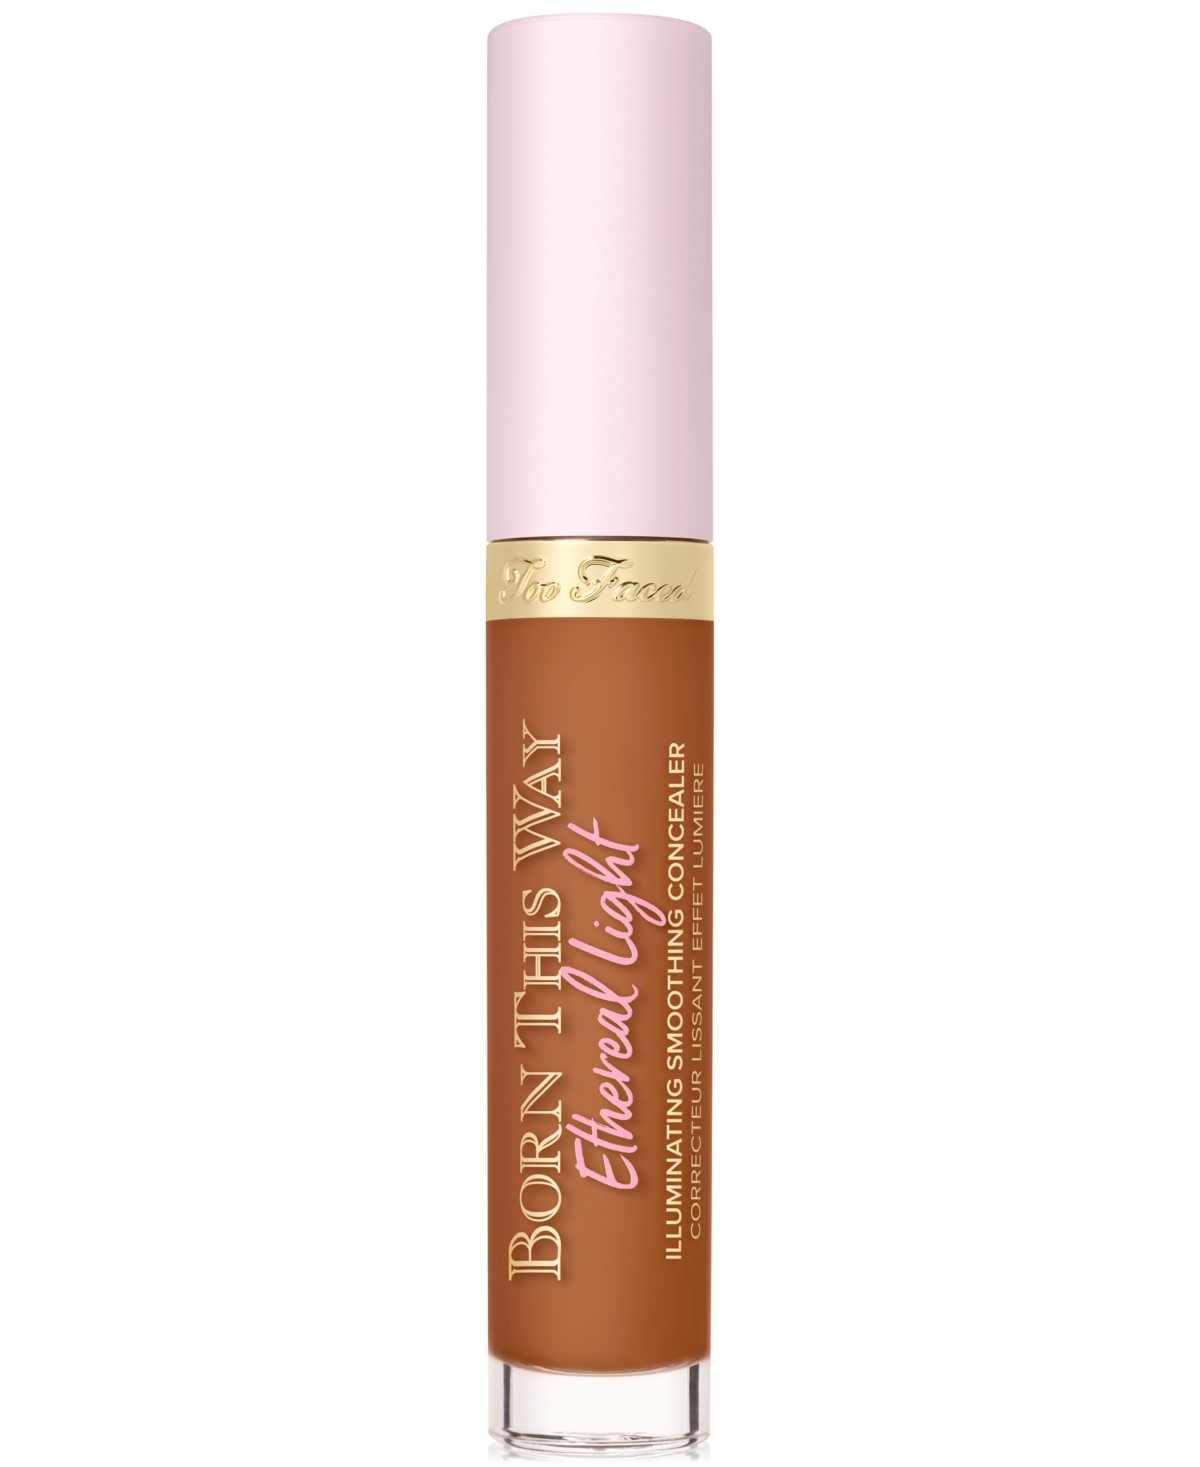 Too Faced Born This Way Ethereal Light Illuminating Smoothing Concealer In Caramel Drizzle - Deep With Golden Under